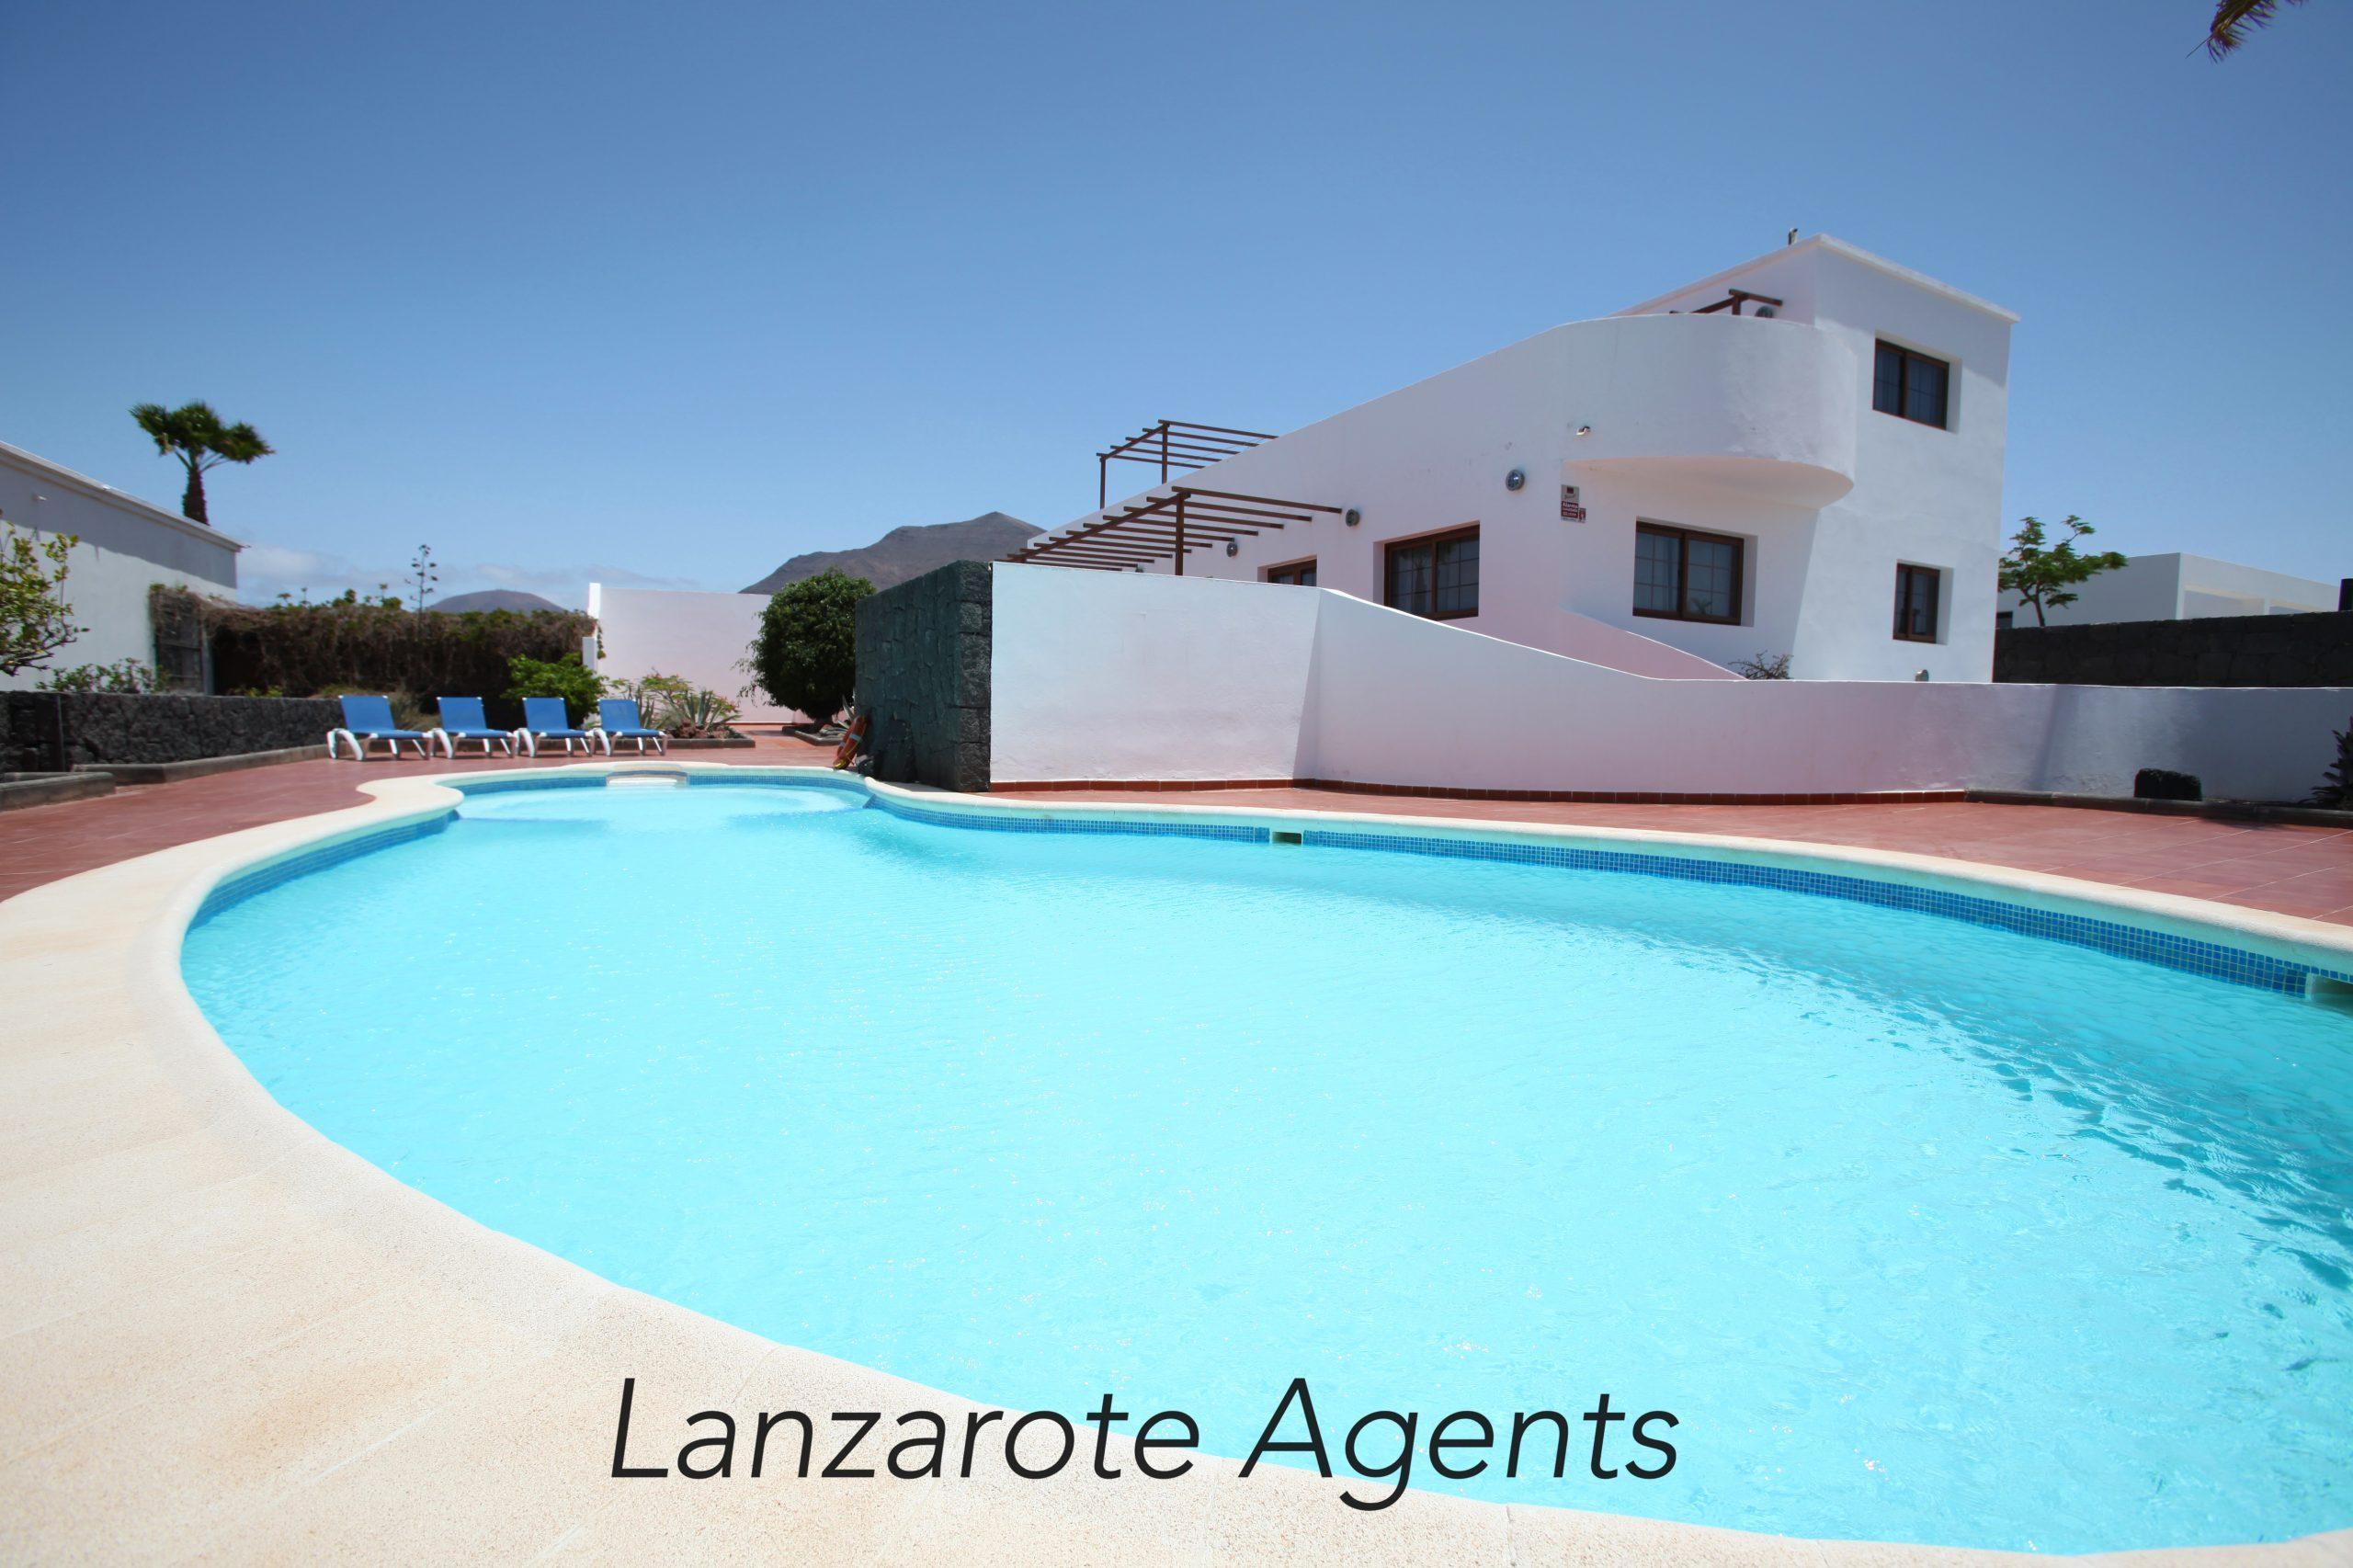 Spacious Detached Villa in Playa Blanca with Big Private Pool, Great Sea and Mountain  Views and Potential